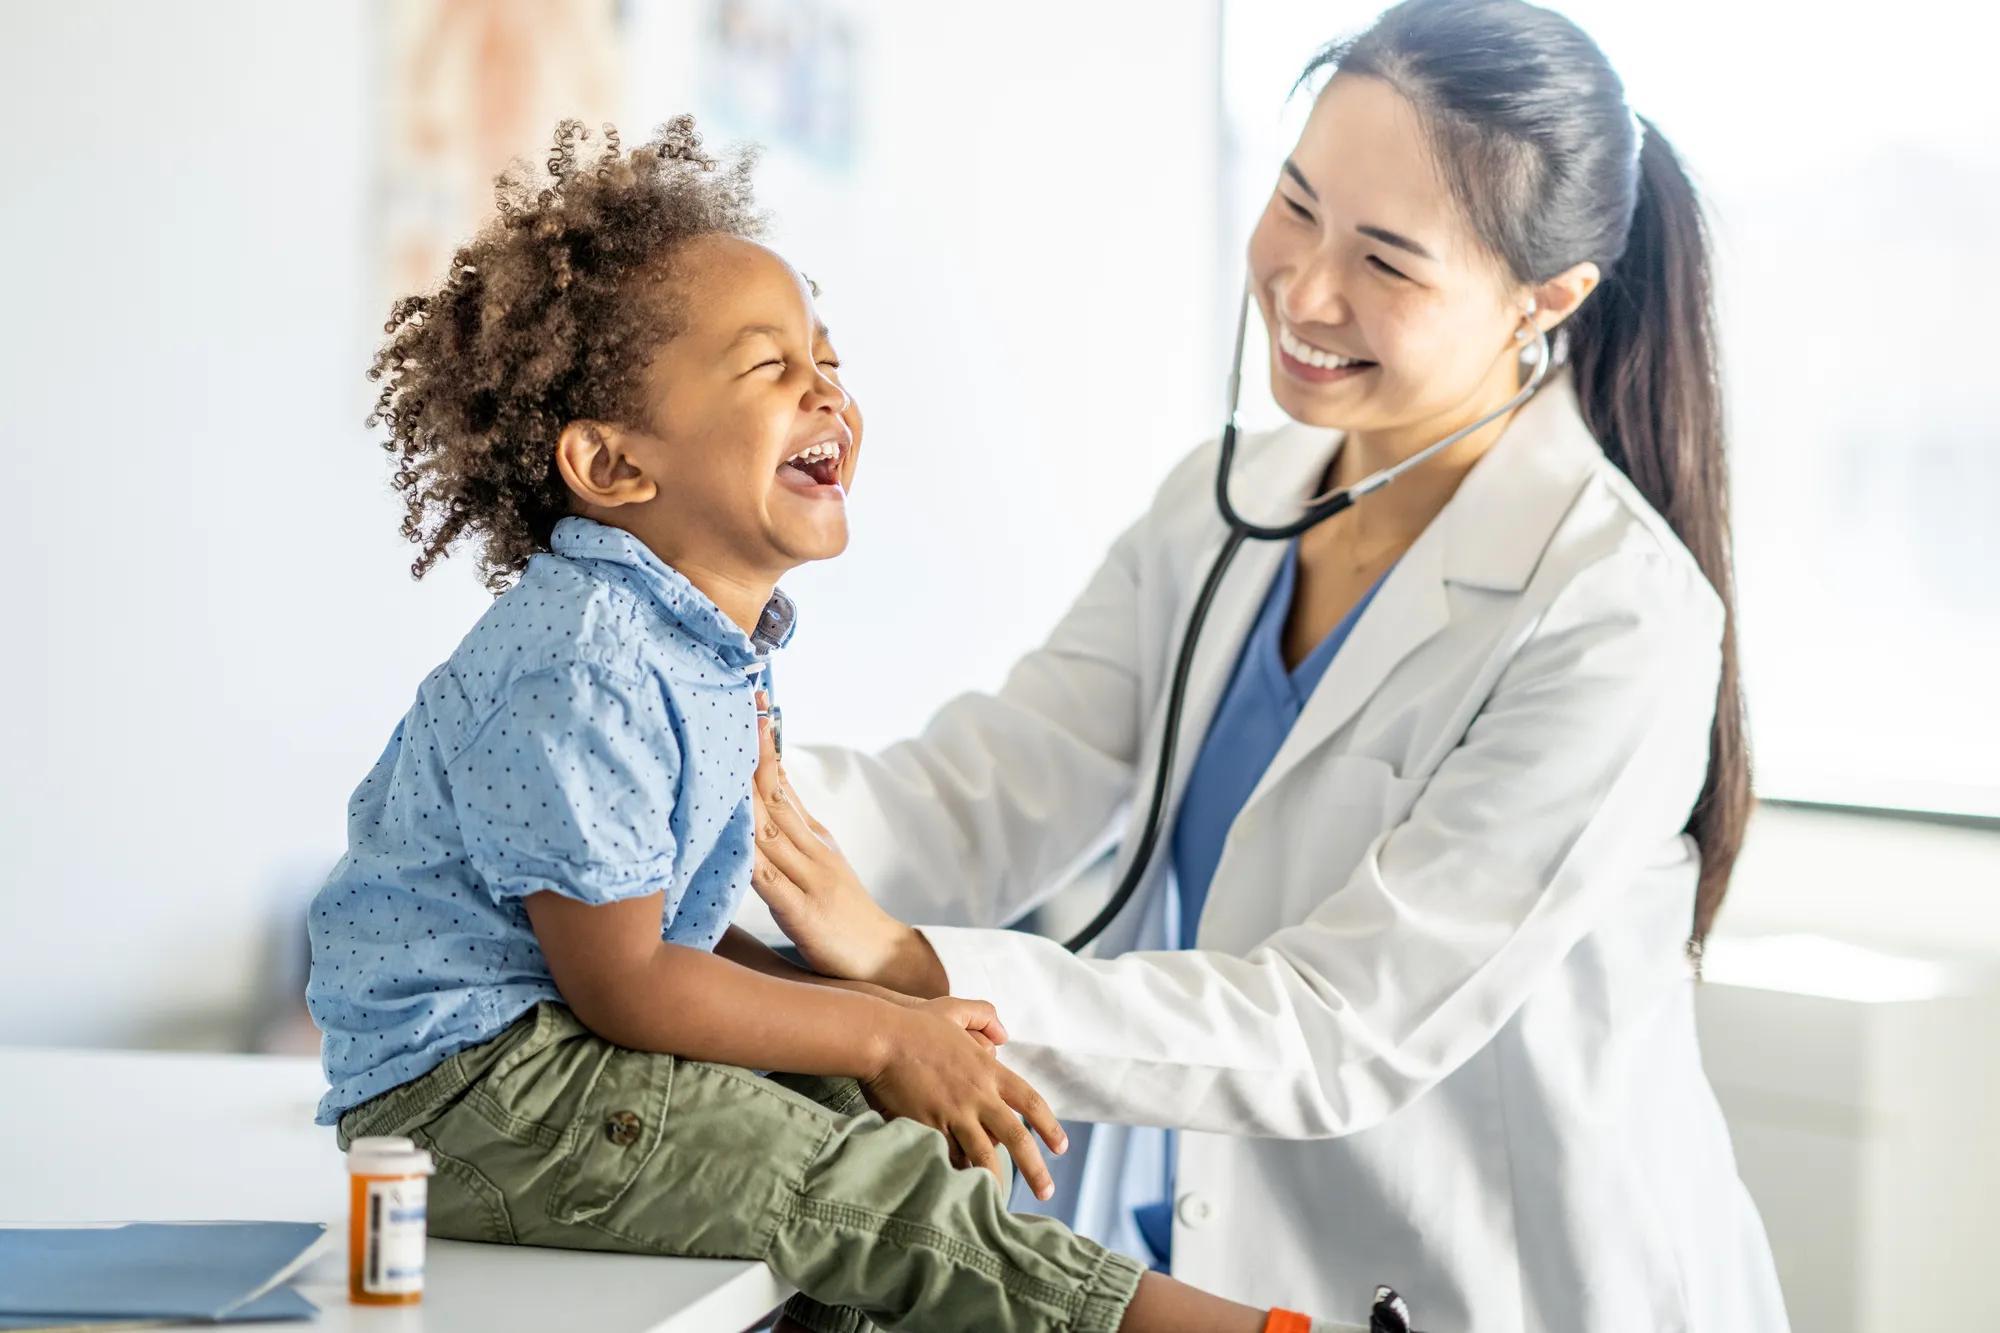 A sweet young mixed race boy, sits up on an exam able with a big smile on his face, during a routine check-up.  His female doctor of Asian decent is leaning in with her stethoscope to listen to his heart.